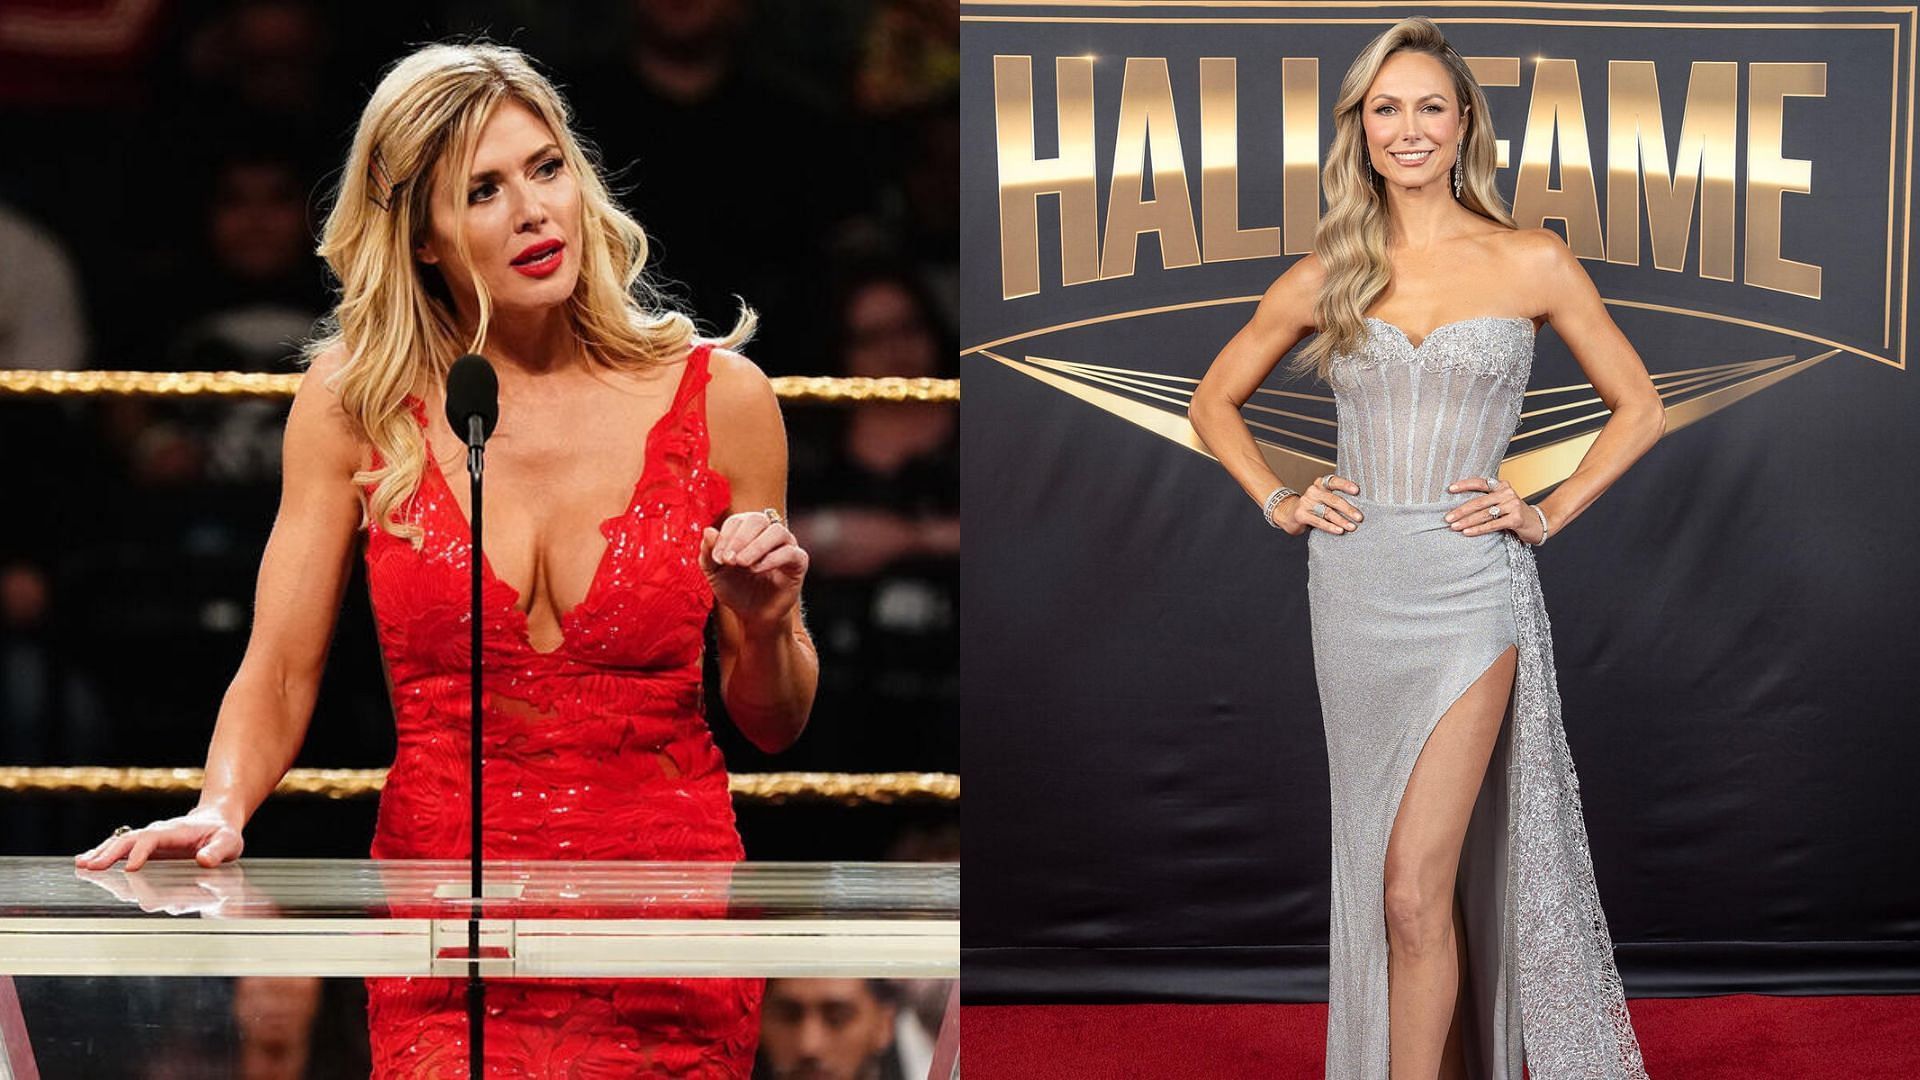 Torrie Wilson (left) was part of the 2019 WWE Hall of Fame class while Stacy Keibler (right) was inducted to the Hall of Fame in 2023 [Photos courtesy of WWE